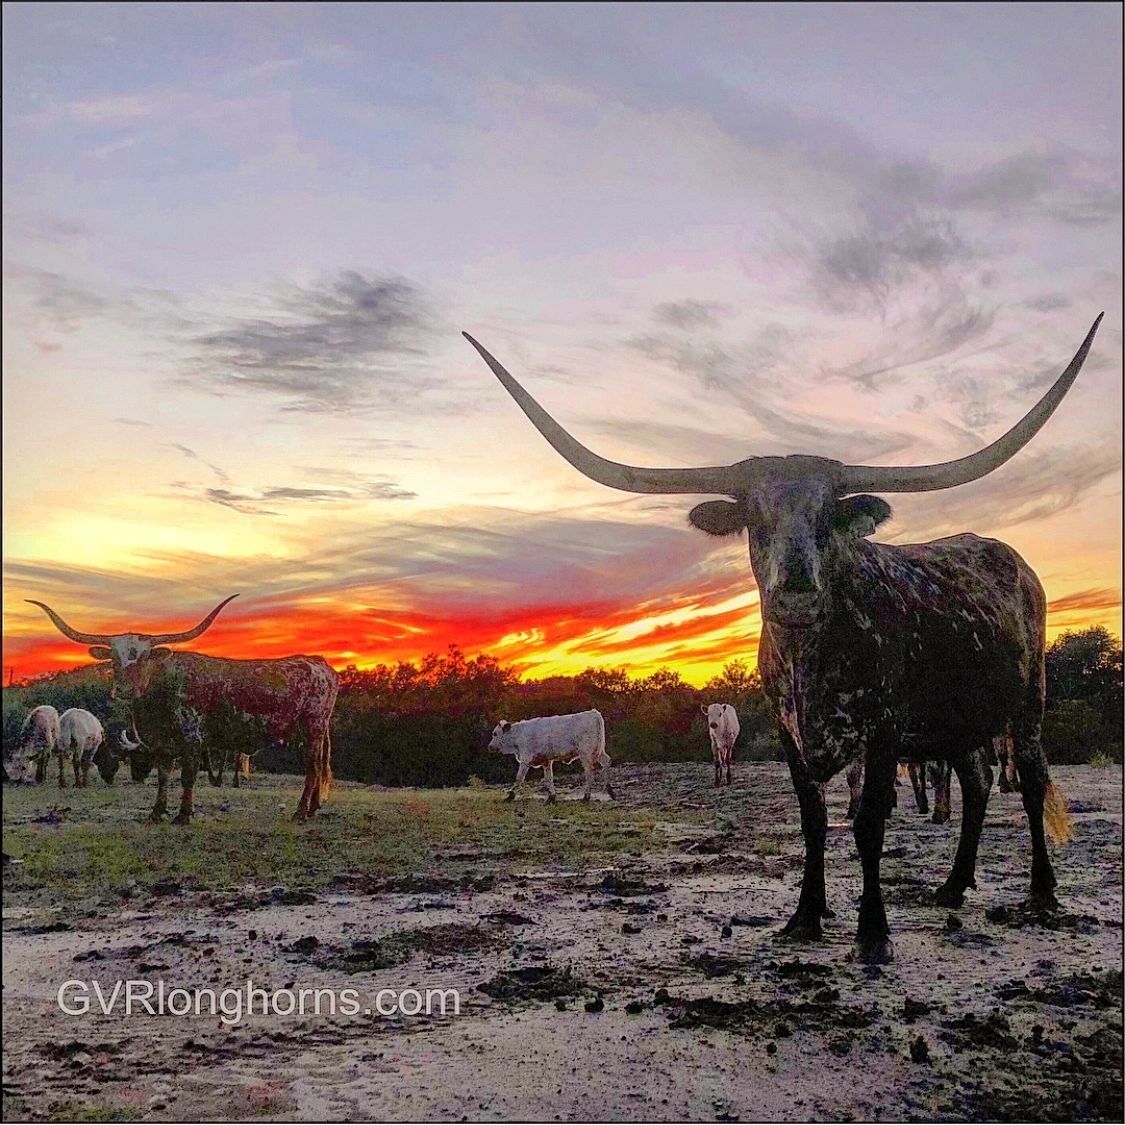 Longhorn cattle at sunset